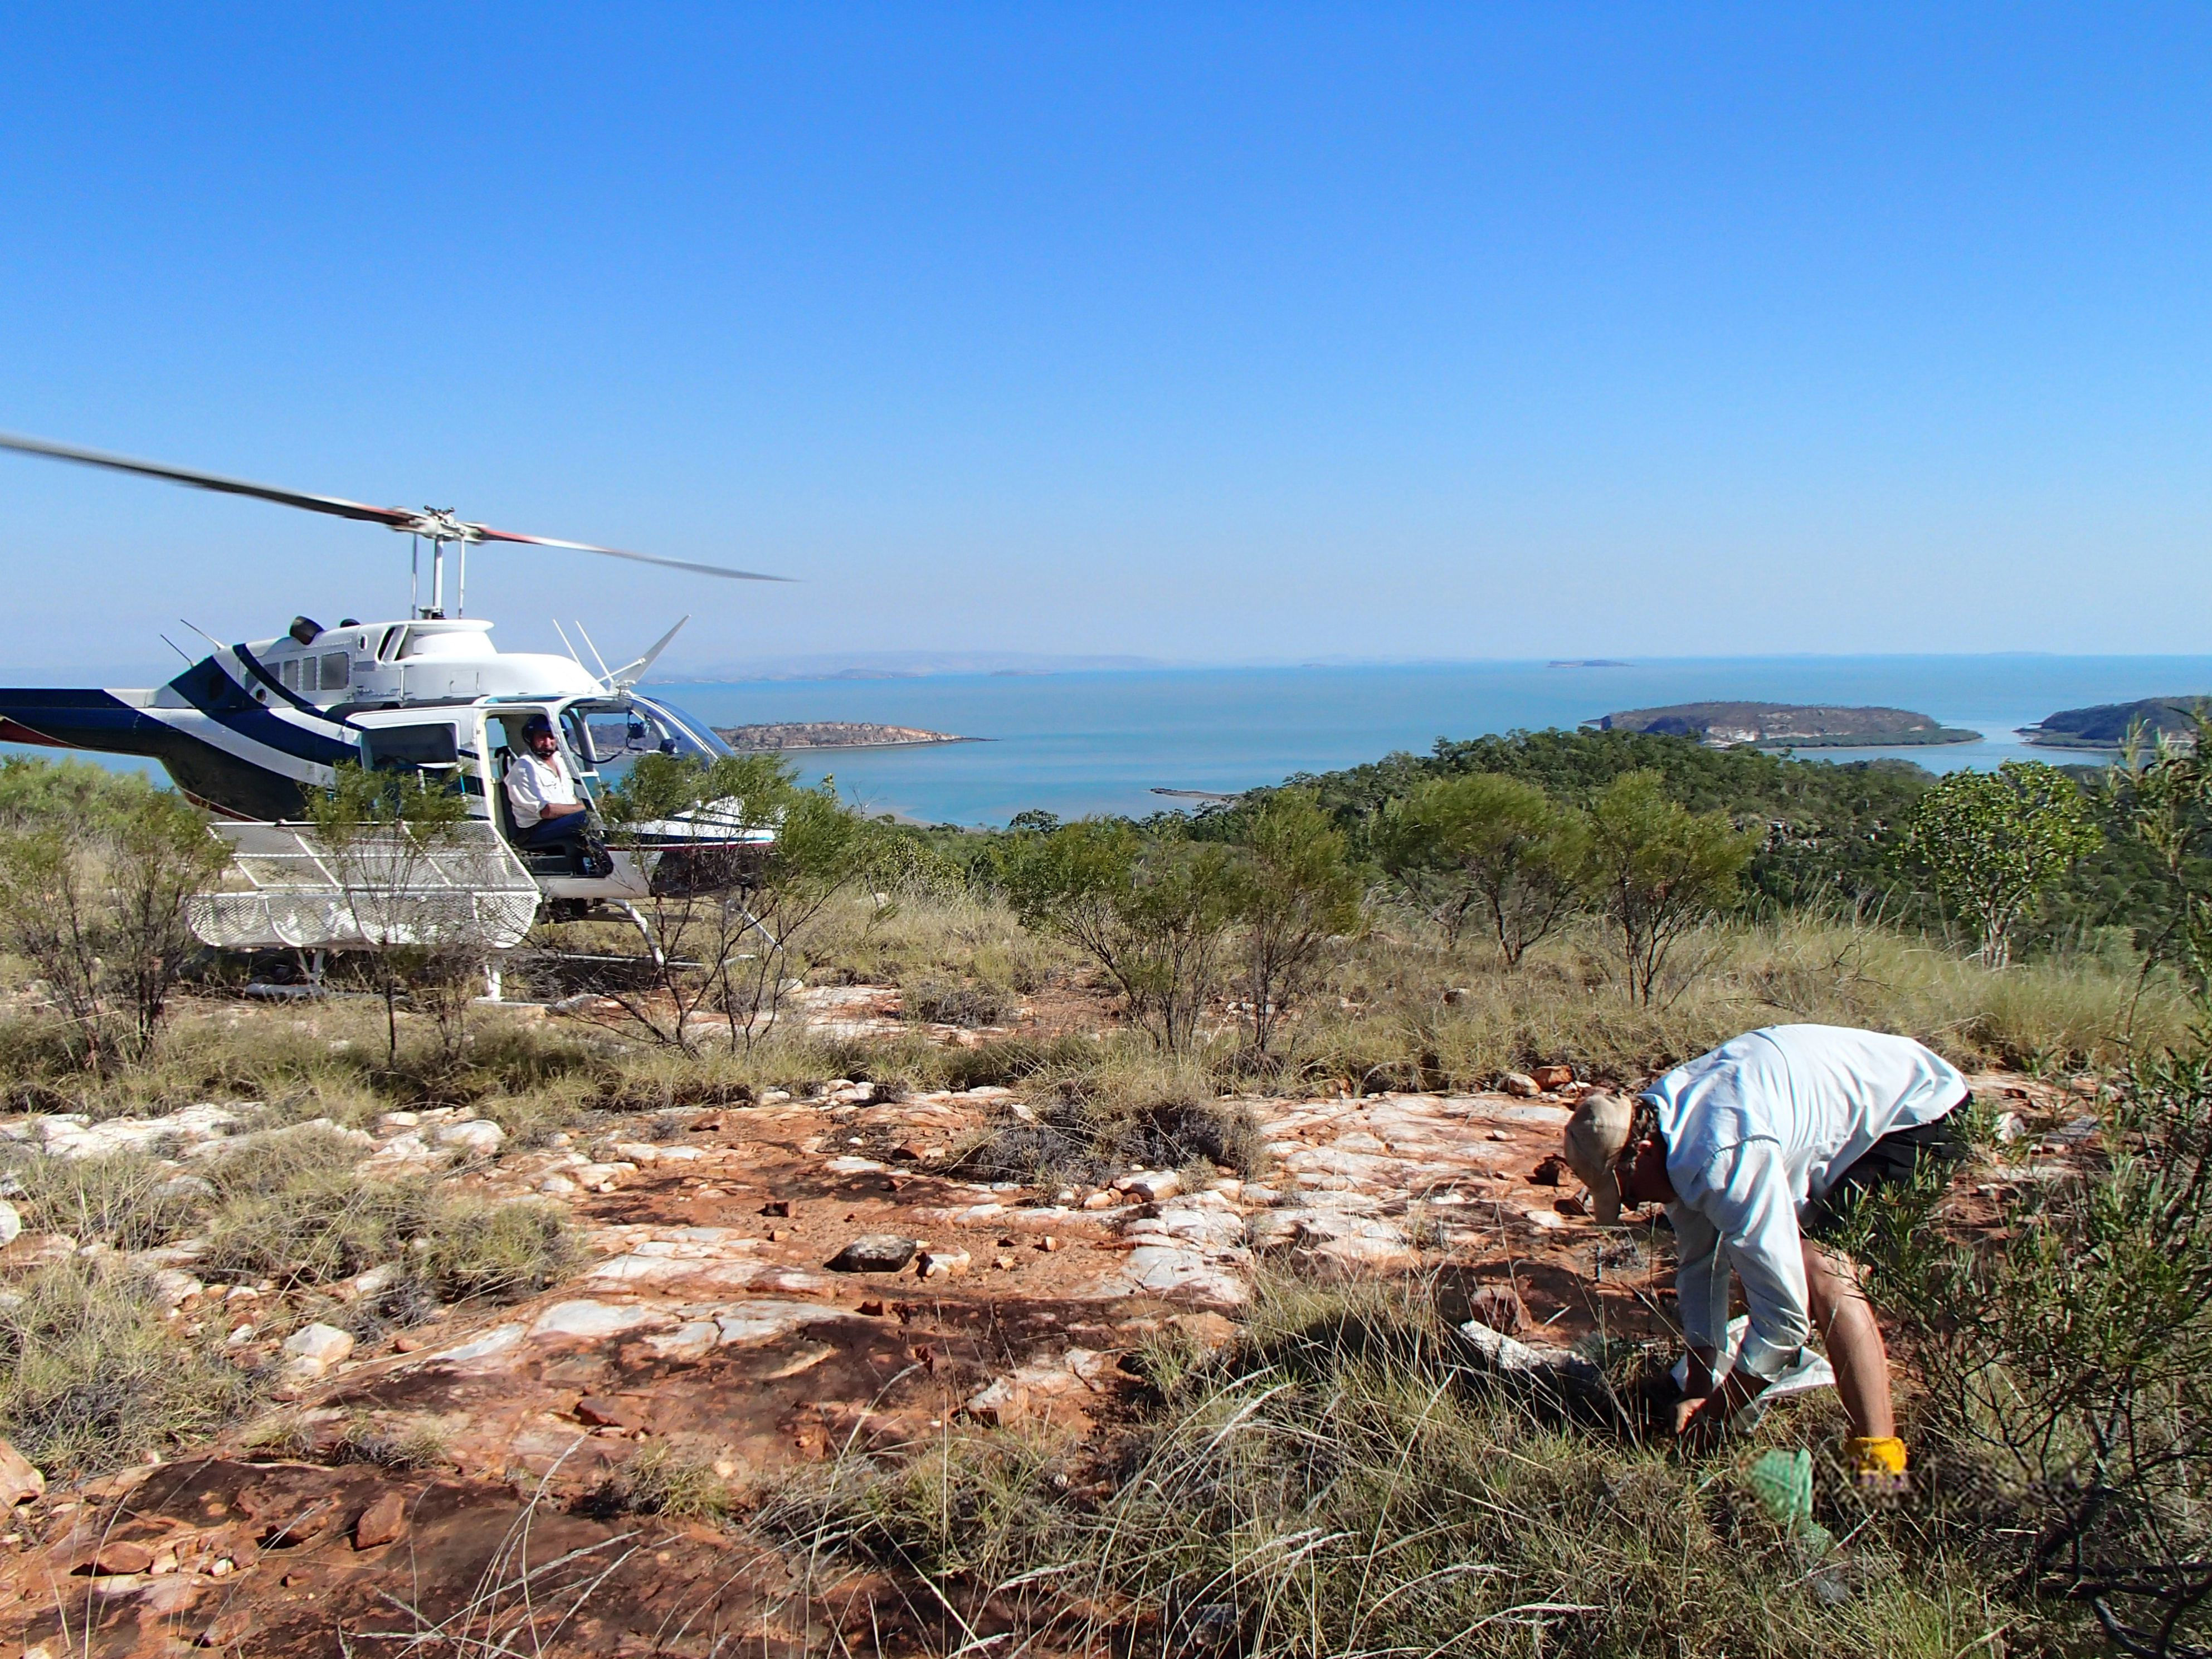 Regolith is poorly developed on the Yampi Peninsula in the western part of the Kimberley region of northwest Australia. Sampling is carried out by helicopter fitted with a skid-mounted basket to hold sampling equipment and expand the sample-carrying capacity. - Paul Morris, Gov of WA